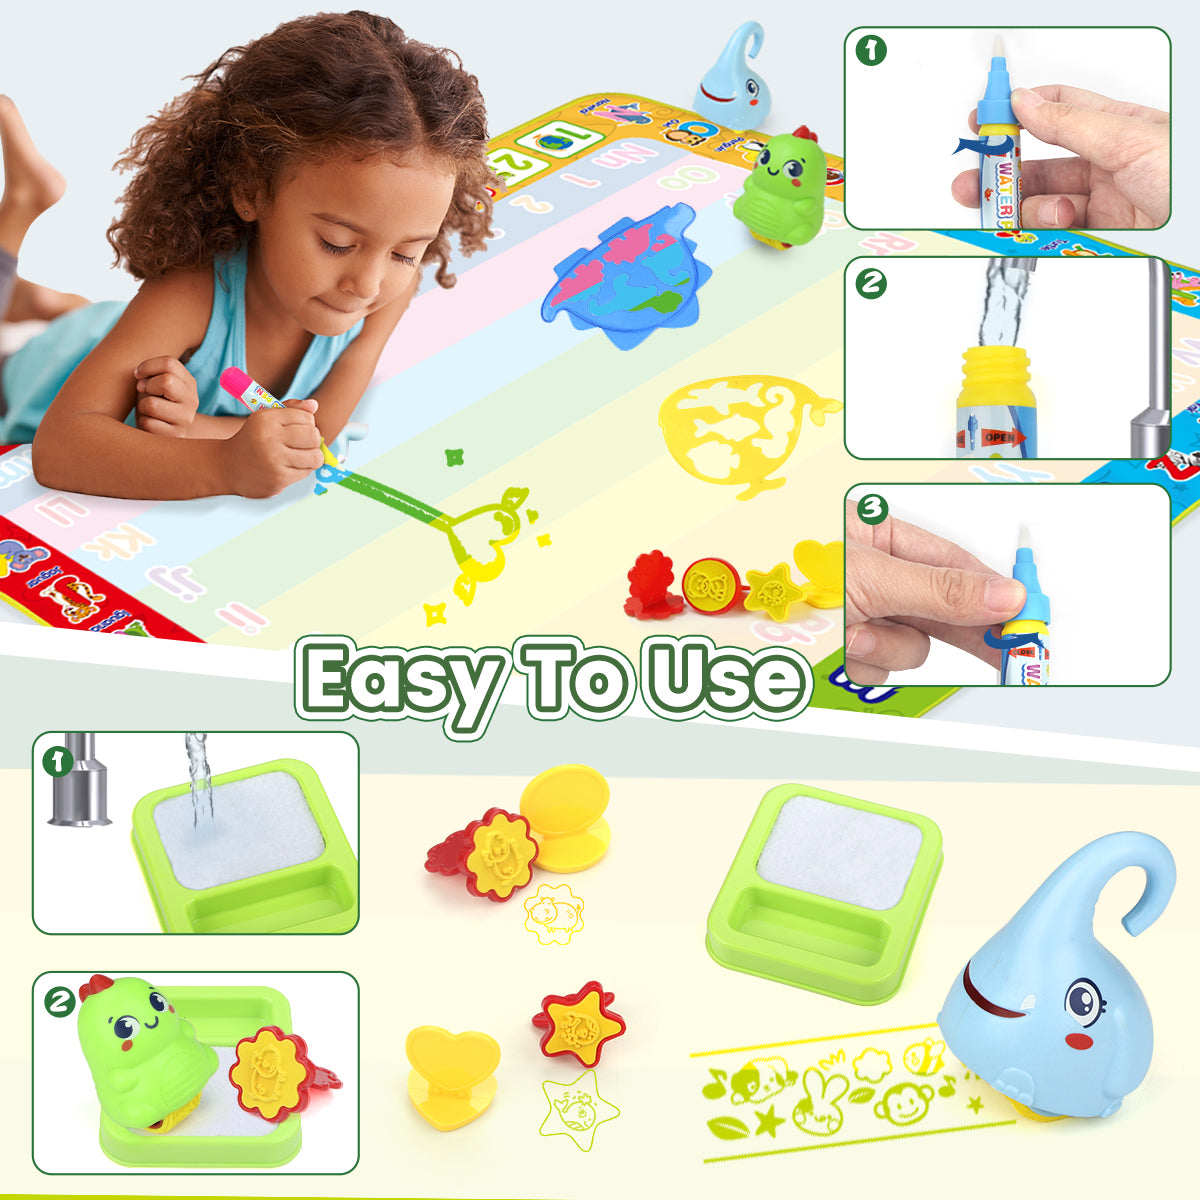 No-Ink Mess-Free Water Doodle Drawing Mat - Educational Toys for